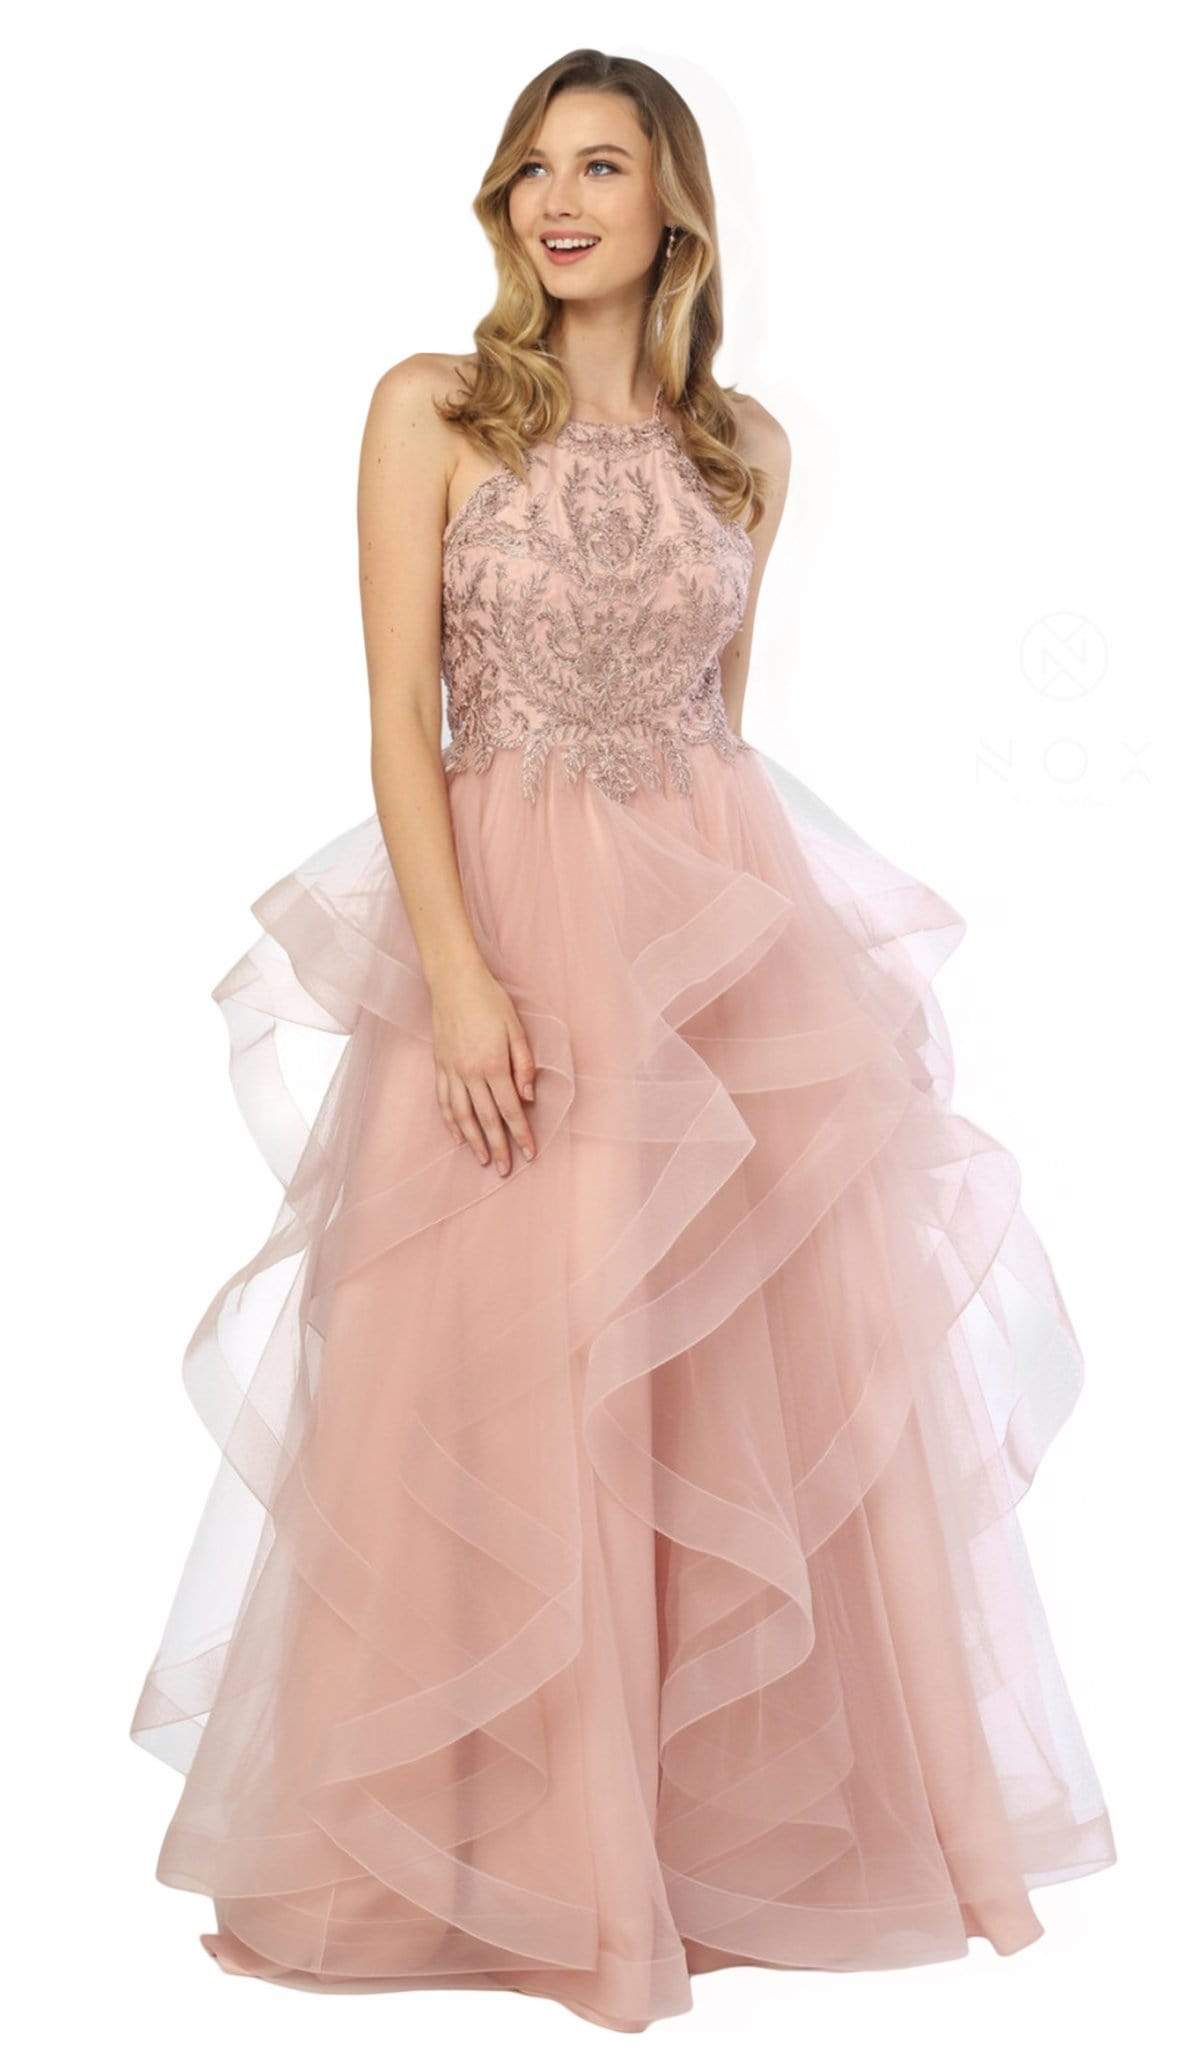 Nox Anabel - S266 Embellished Halter Ruffled A-line Dress Special Occasion Dress XS / Rosegold